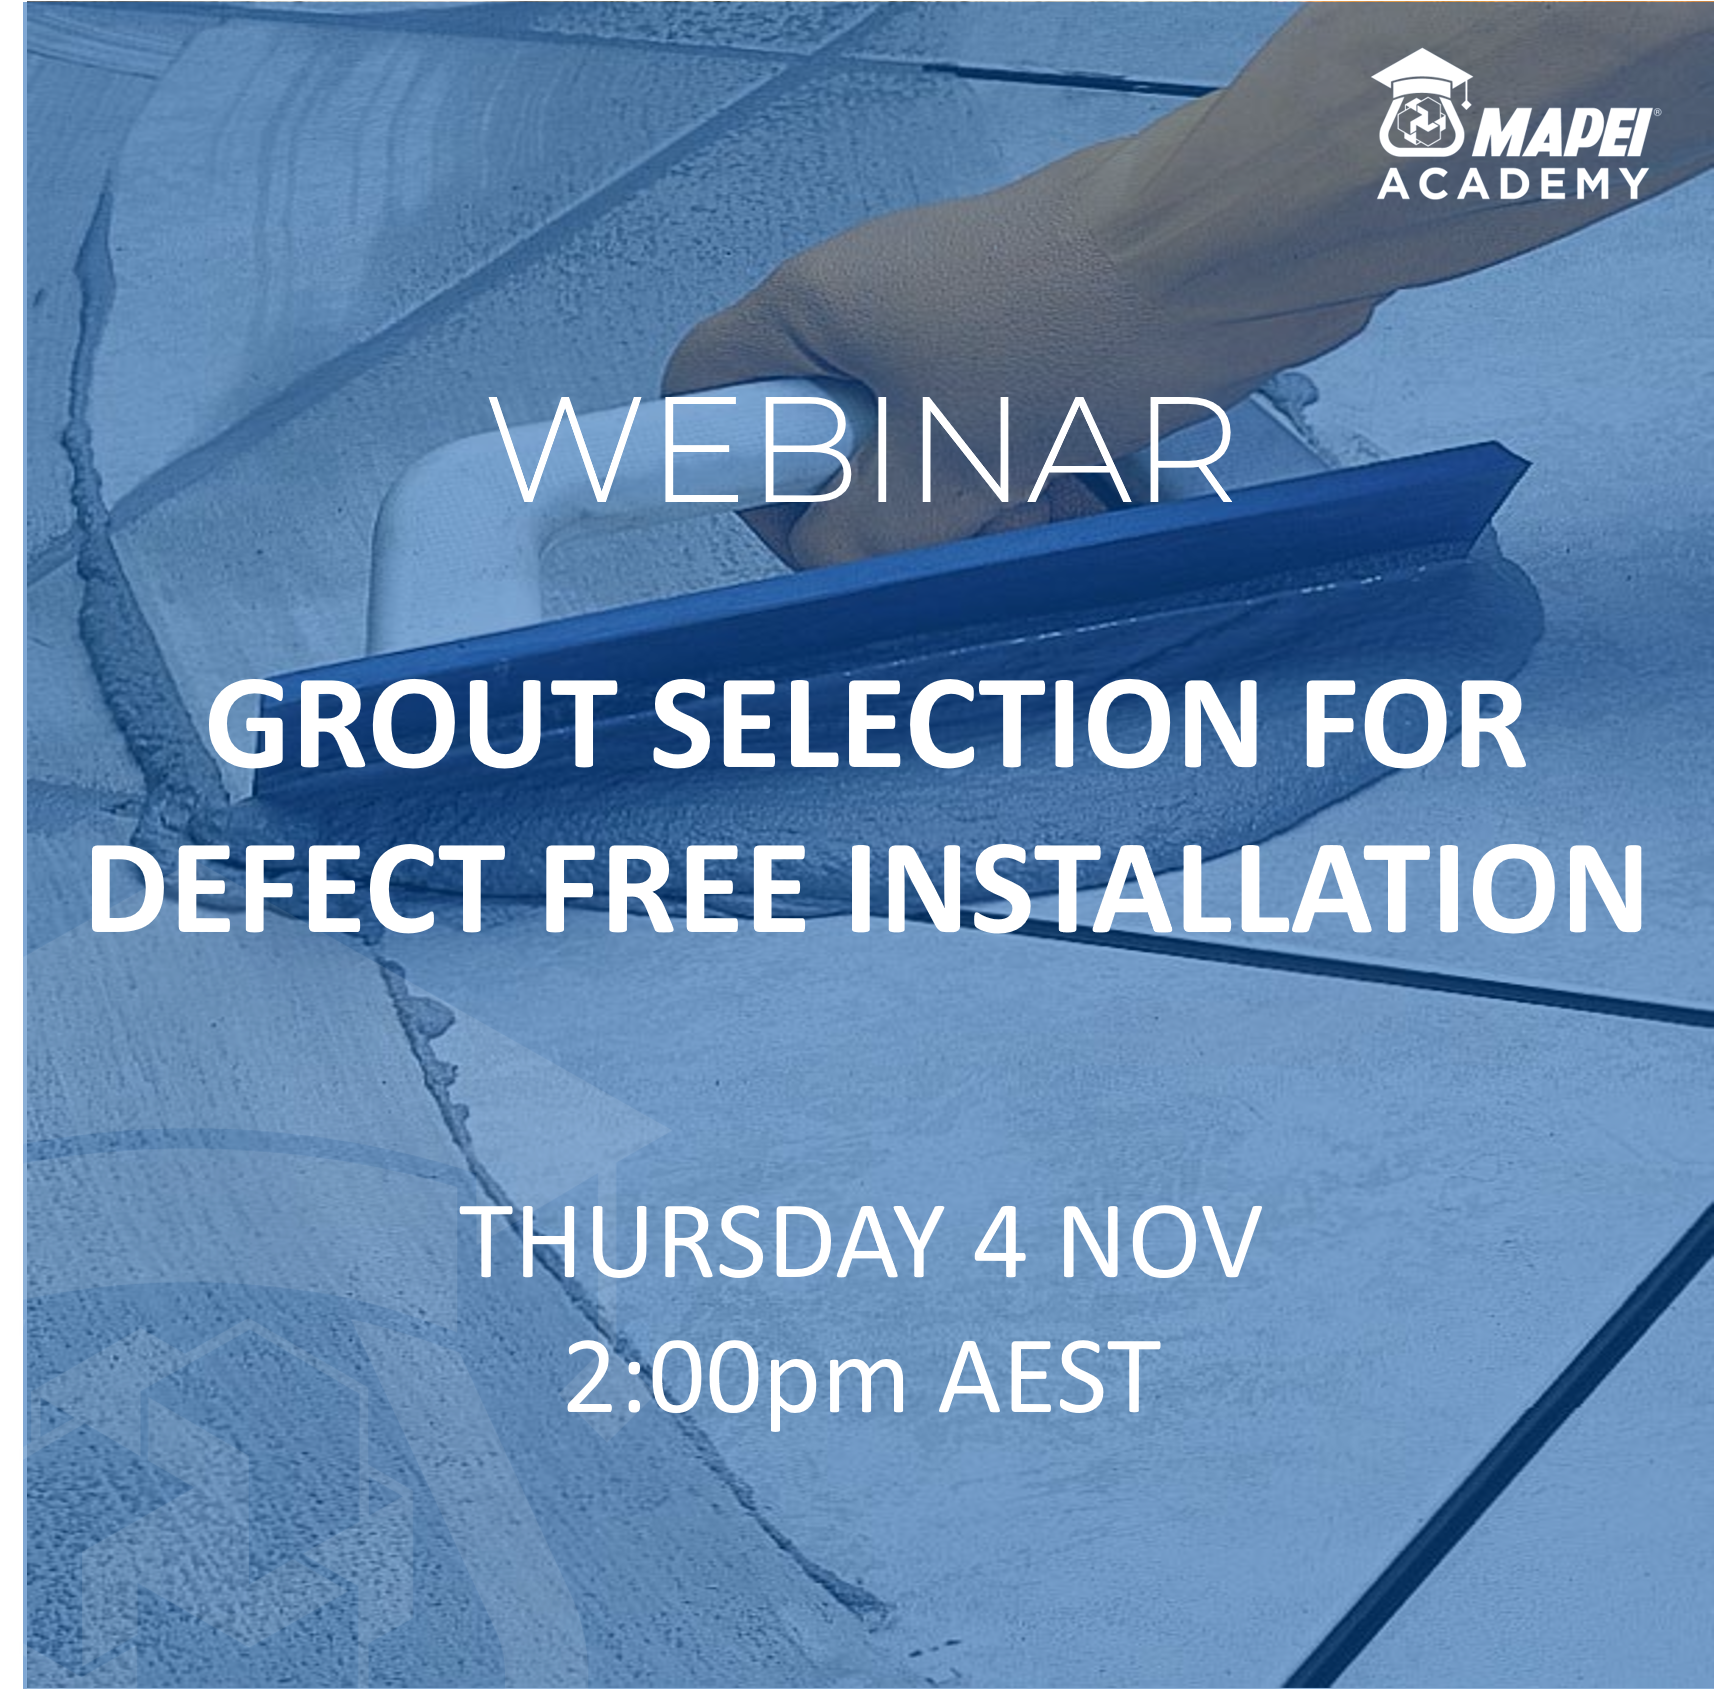 MAGNEWS - Grout Selection for Defect Free Installation 4.11.21-min